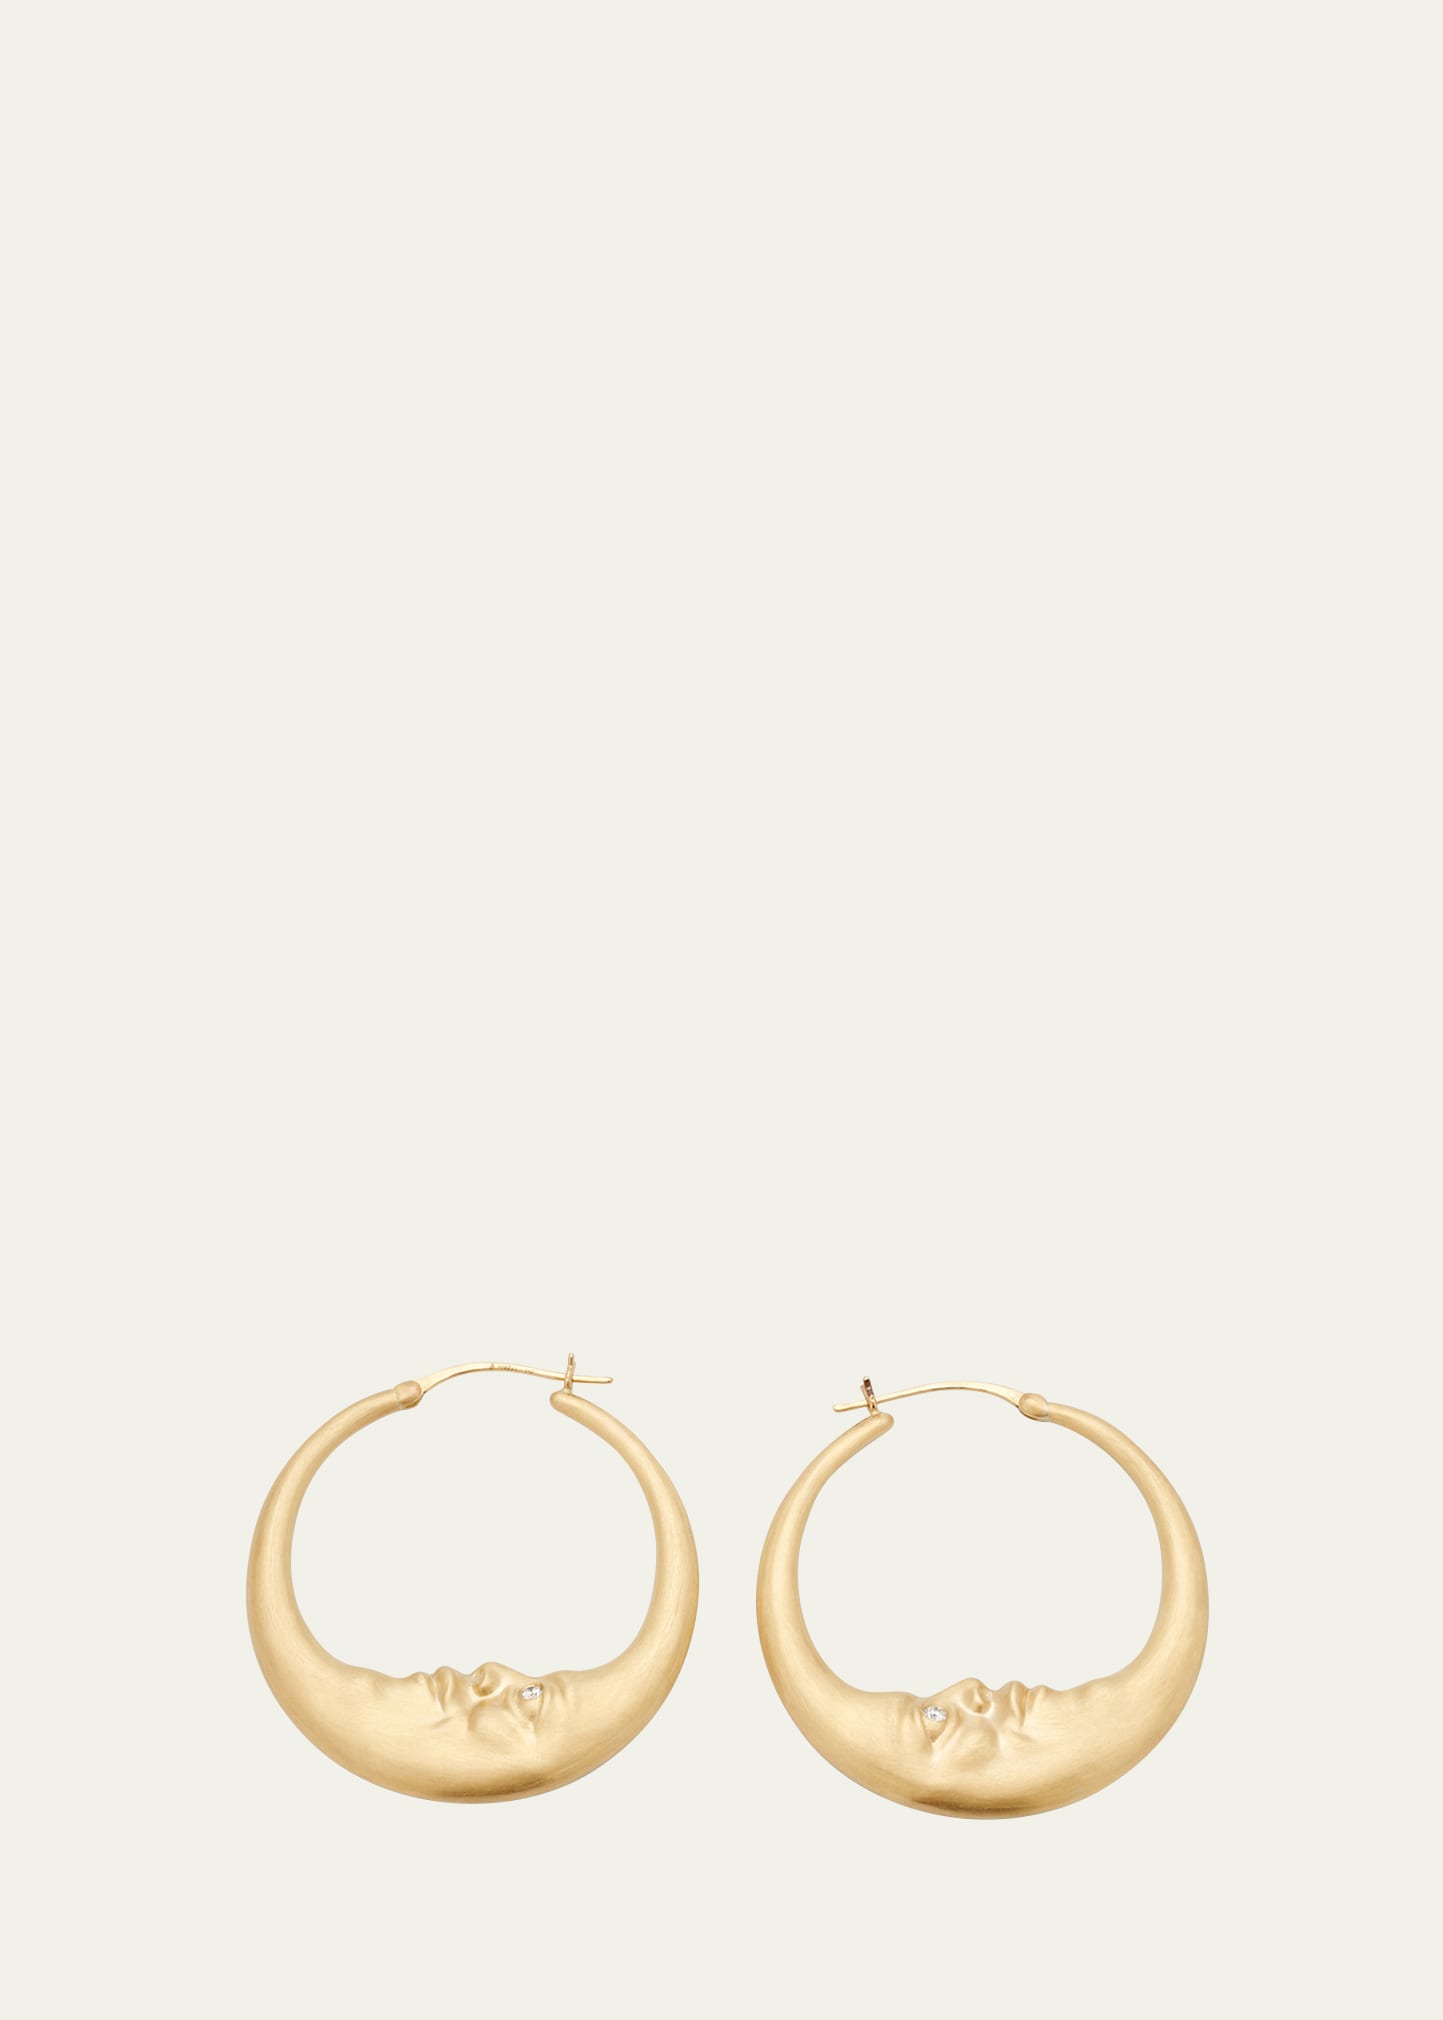 Anthony Lent 40mm Crescent Moon Hoop Earrings in 18k Gold